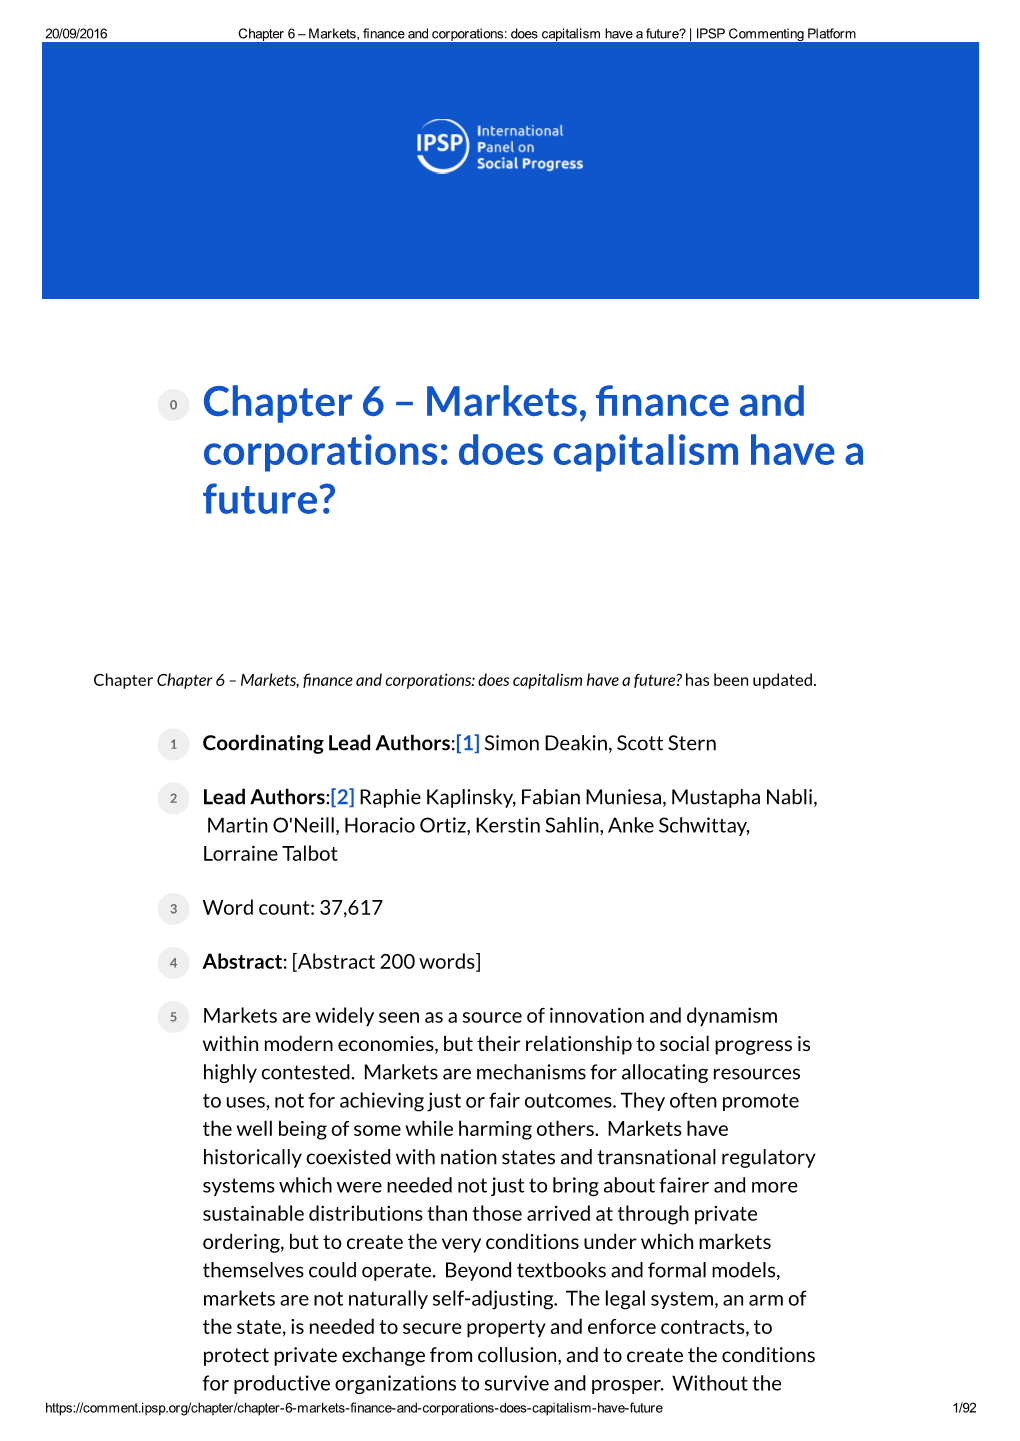 Chapter 6 – Markets, Finance and Corporations: Does Capitalism Have a Future? | IPSP Commenting Platform